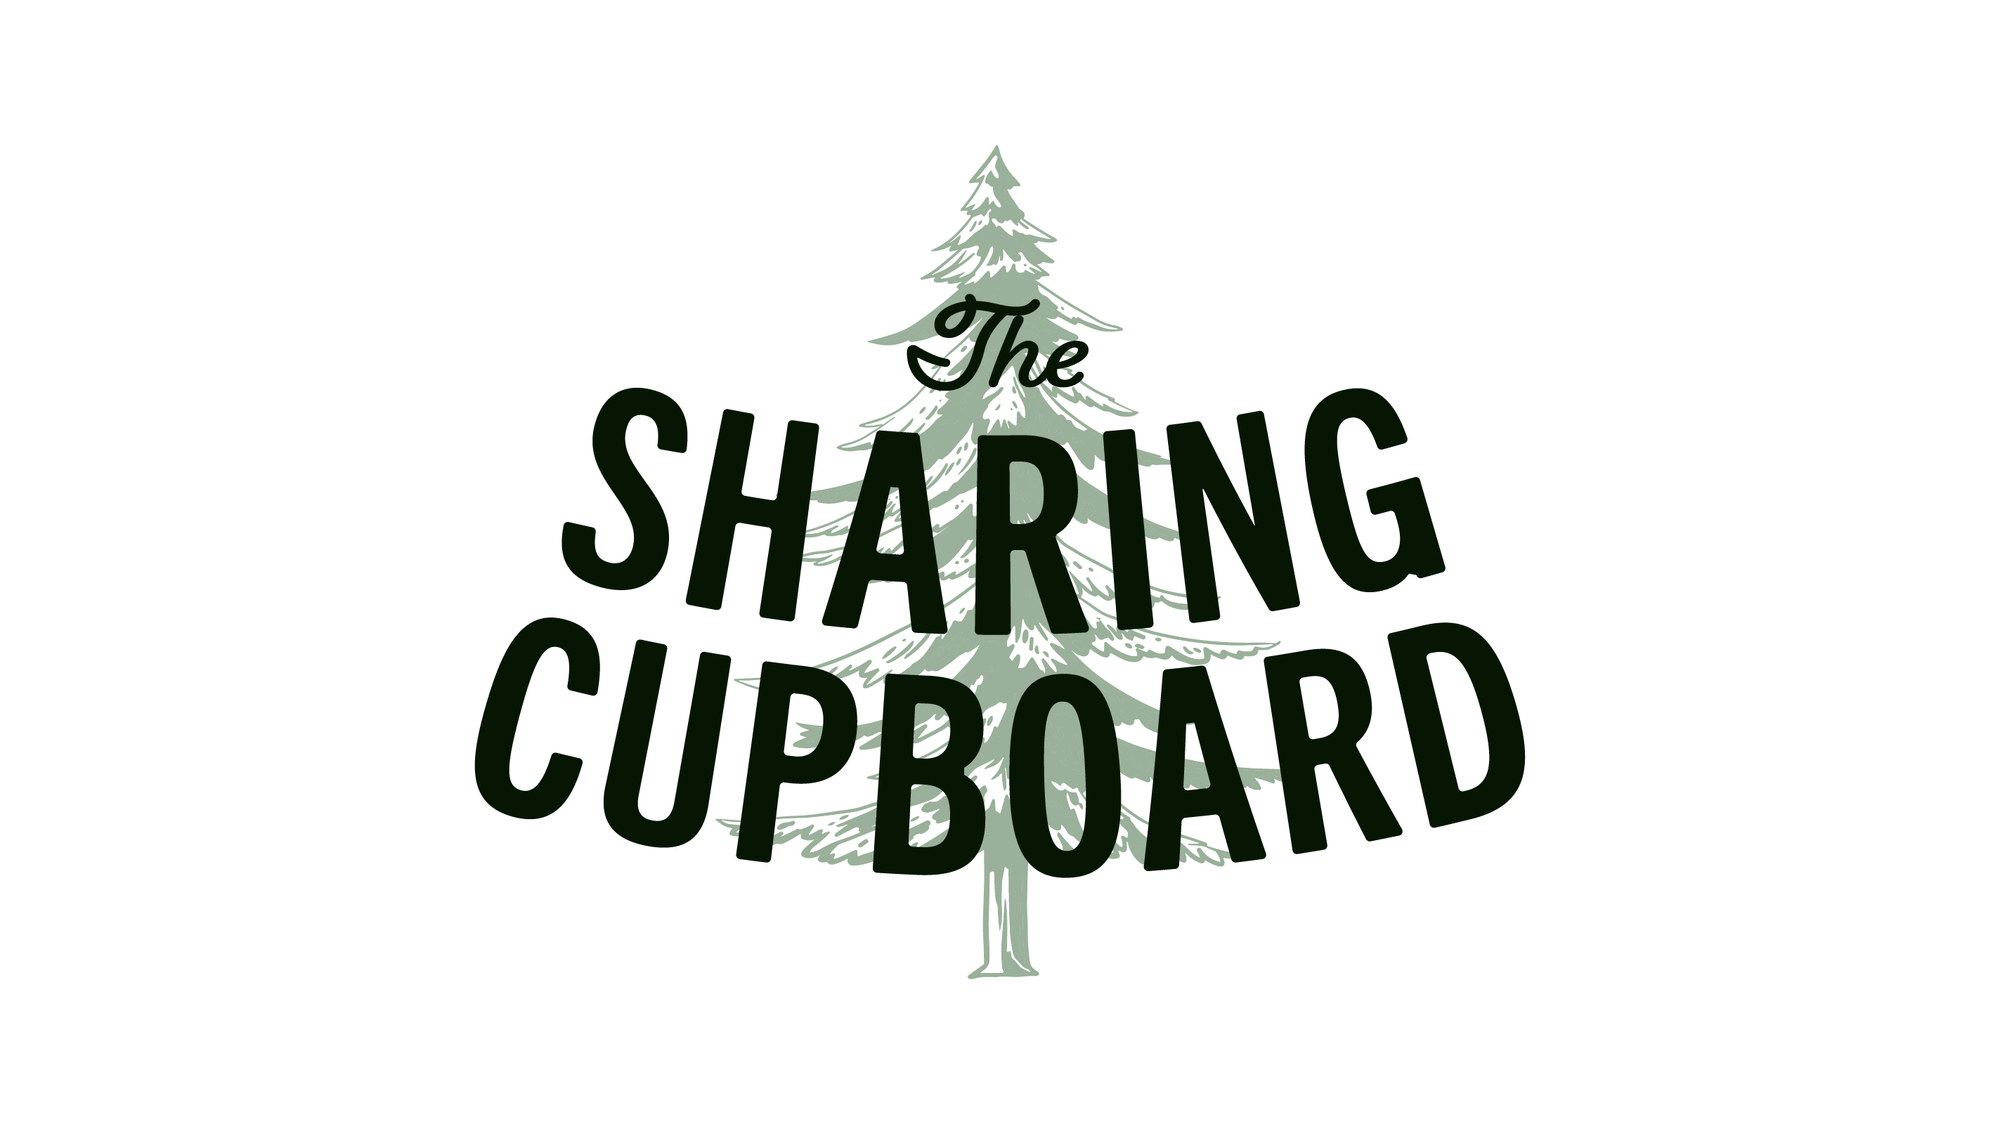 The Sharing Cupboard